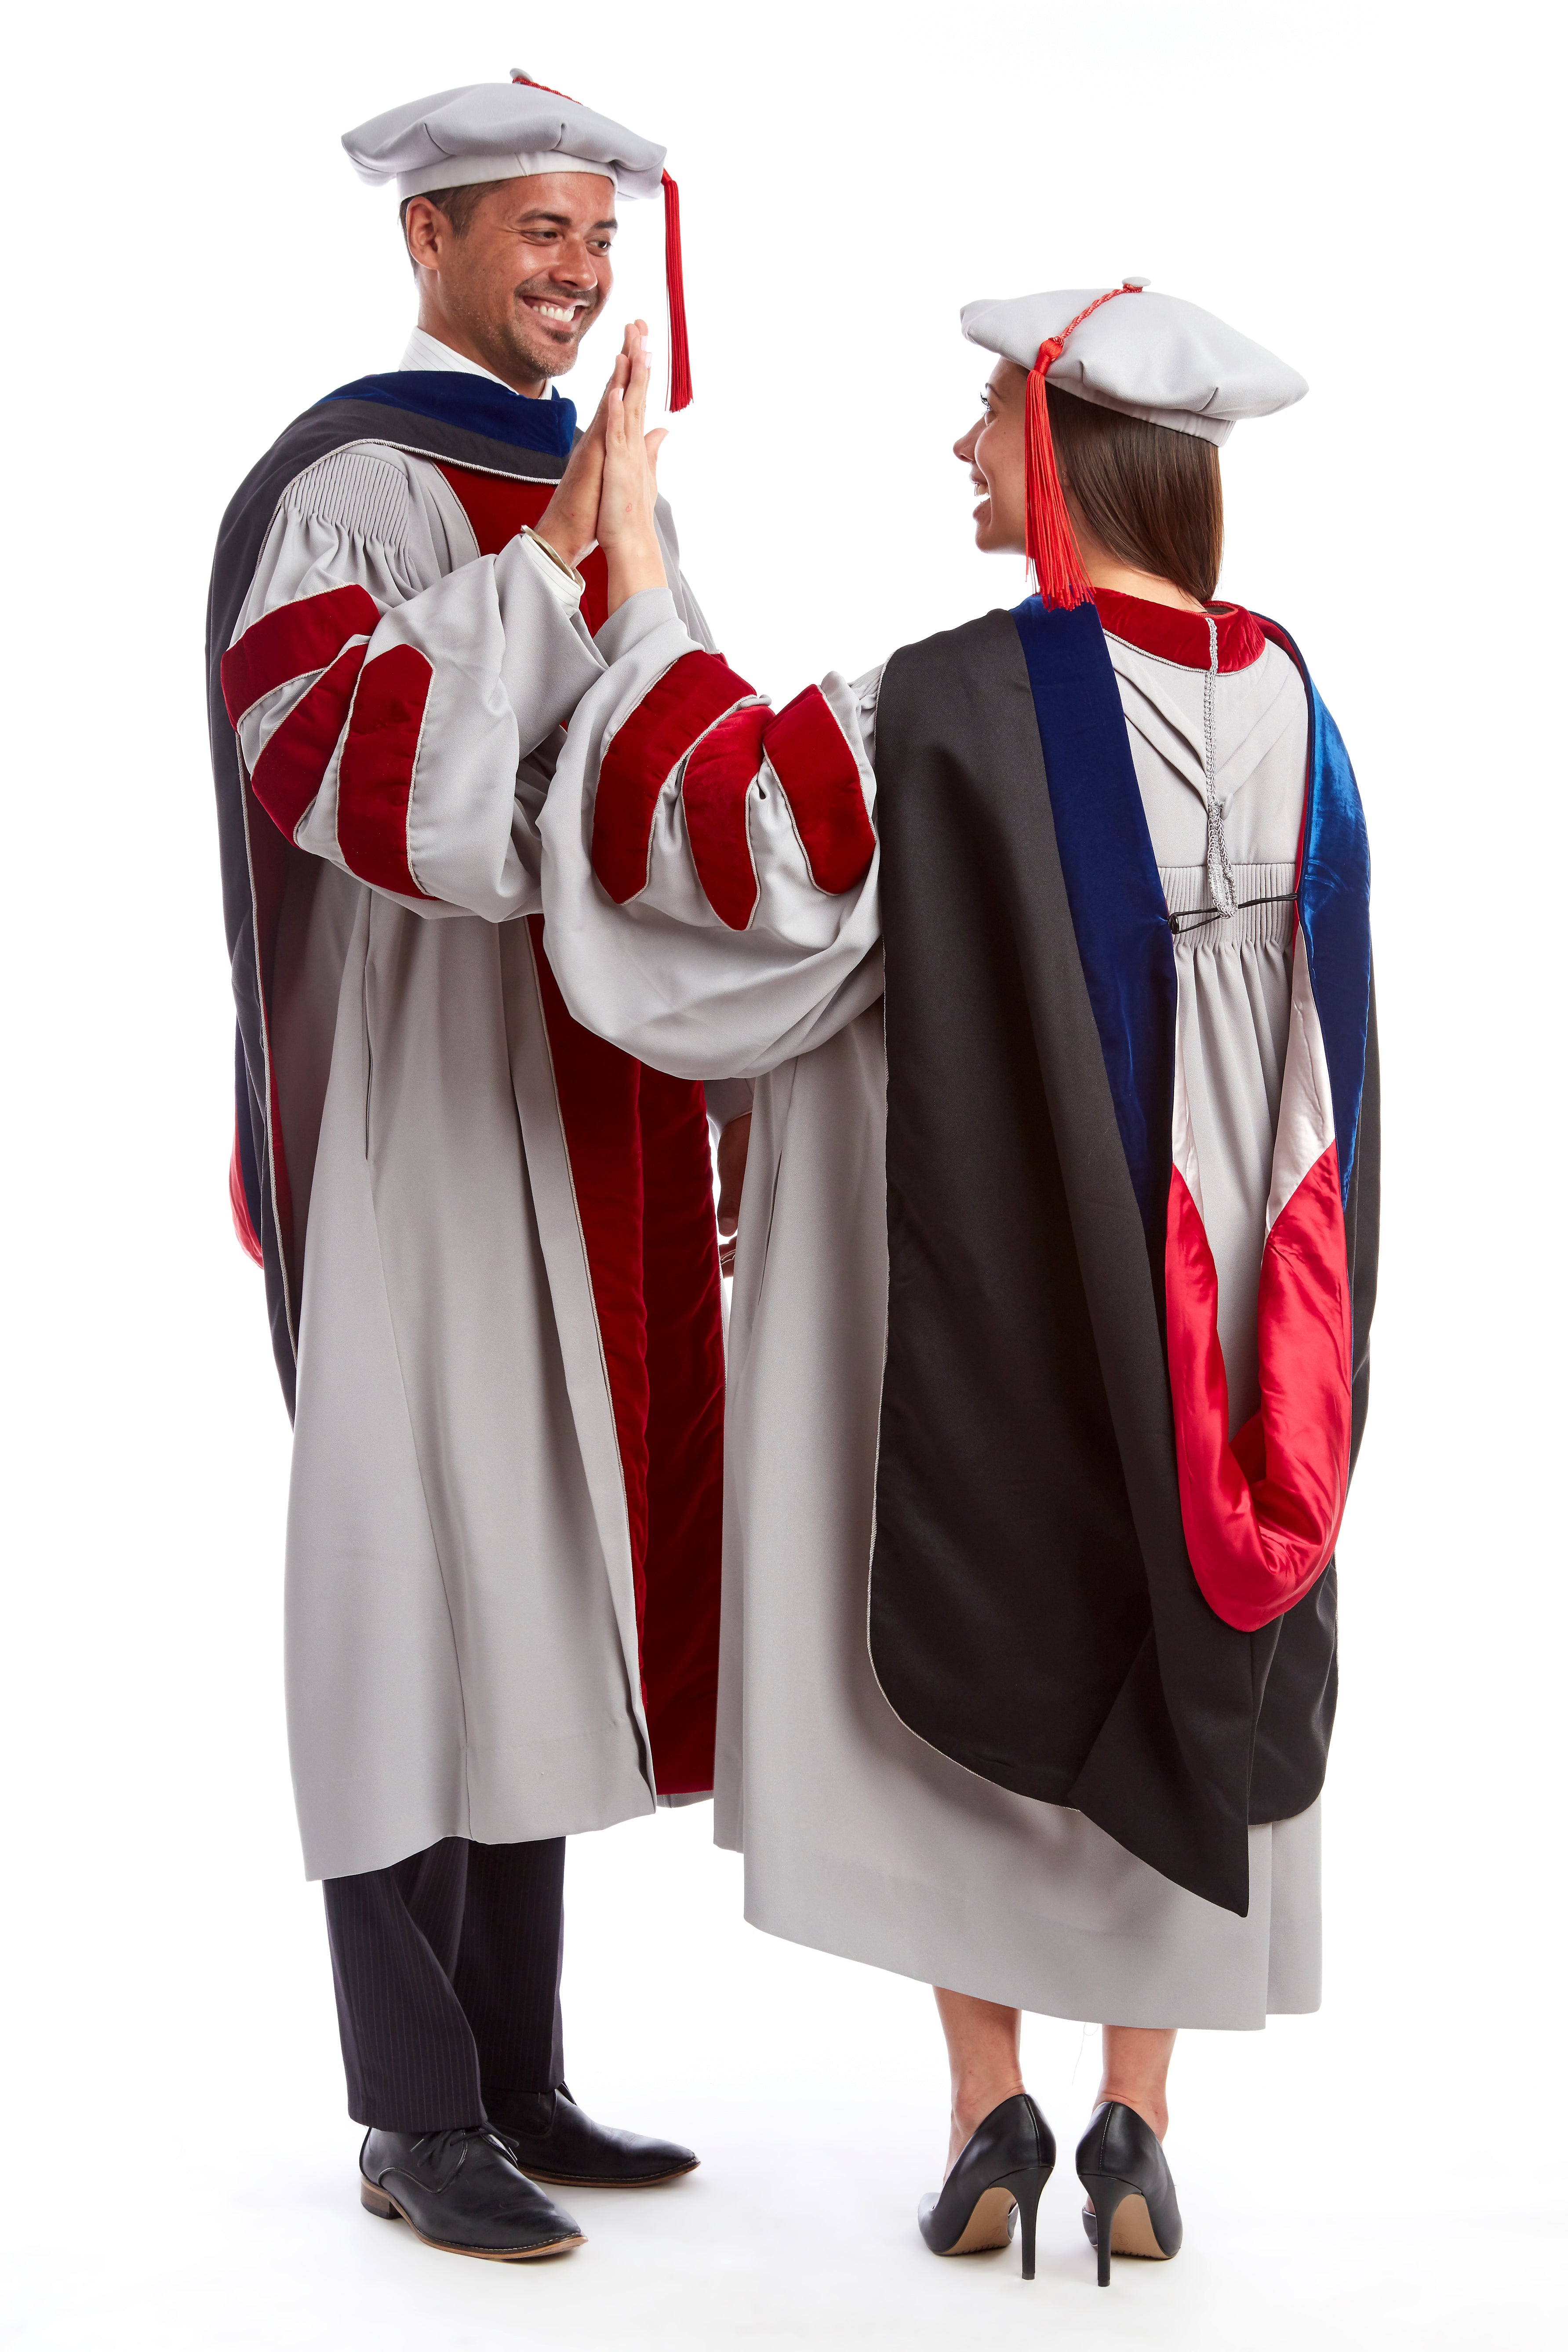 MIT Doctoral Regalia Set. Doctoral Grey and Cardinal Red Gown, PhD Hood, and Eight-Sided Cap/Tam including Red Tassel